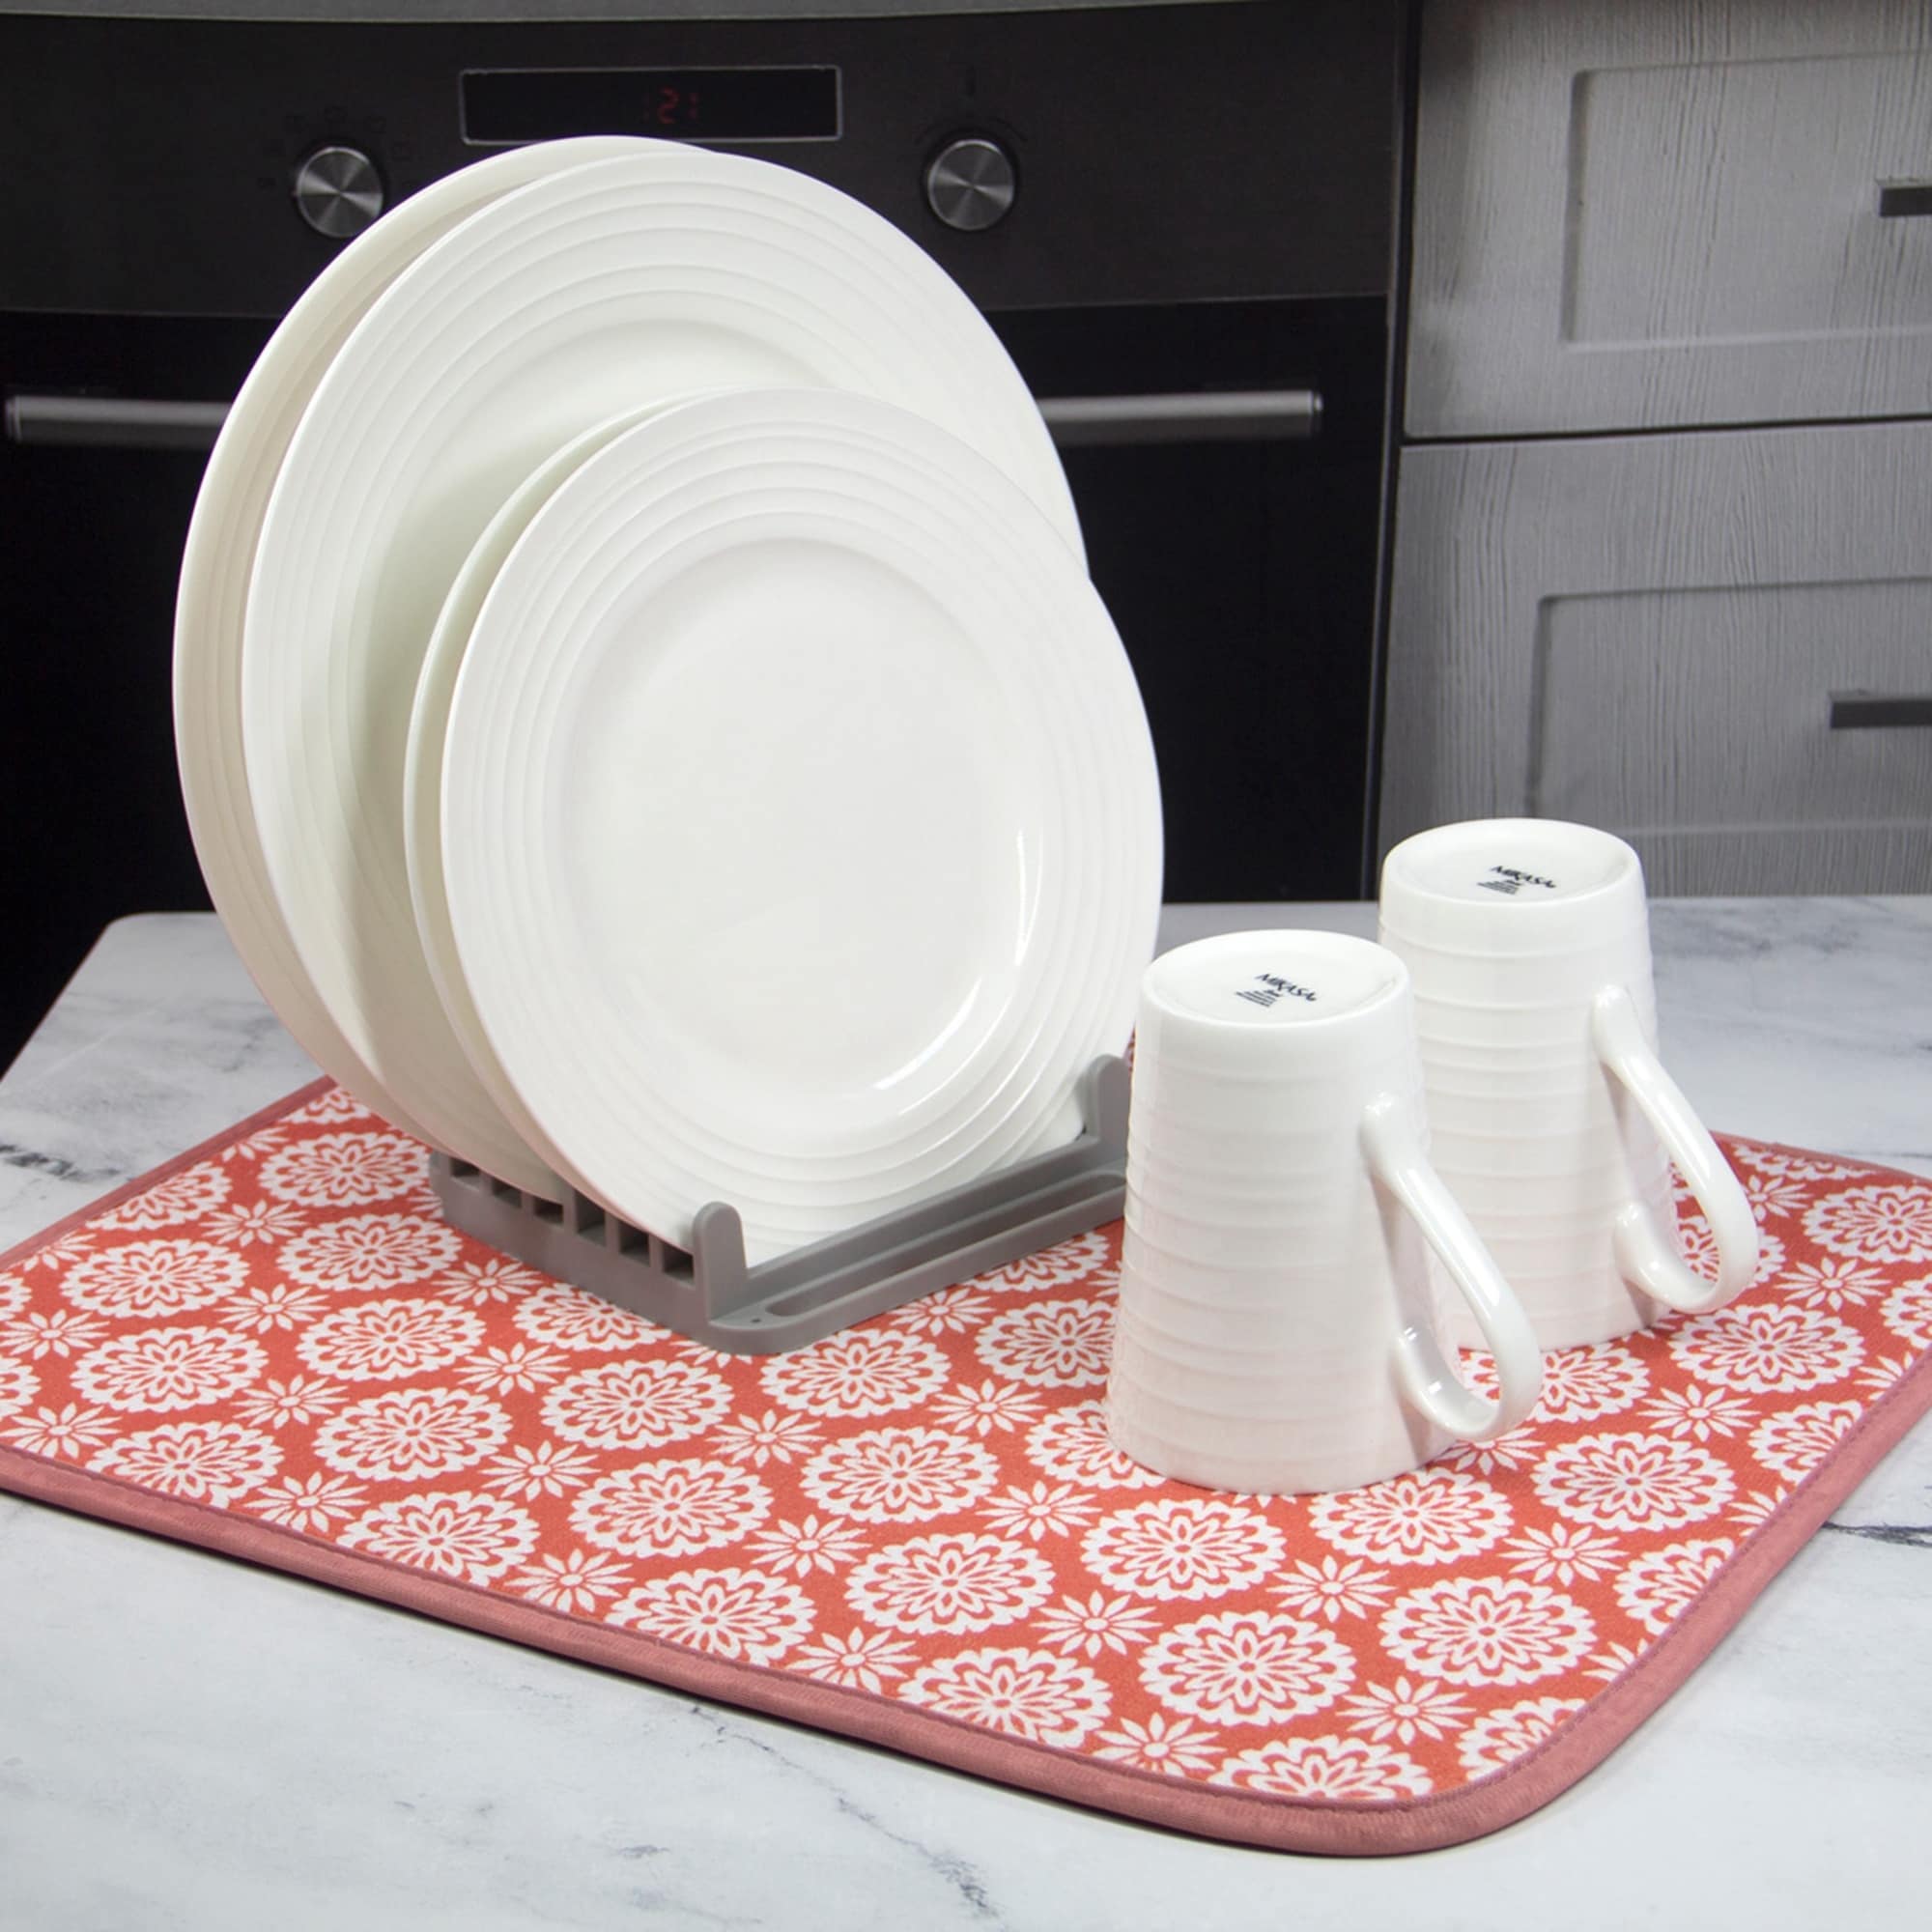 https://ak1.ostkcdn.com/images/products/is/images/direct/40d8db566732068c3815320a6334cfae54350cb8/Reversible-Dish-Drying-Mat-2-Pk%2C-Coral.jpg